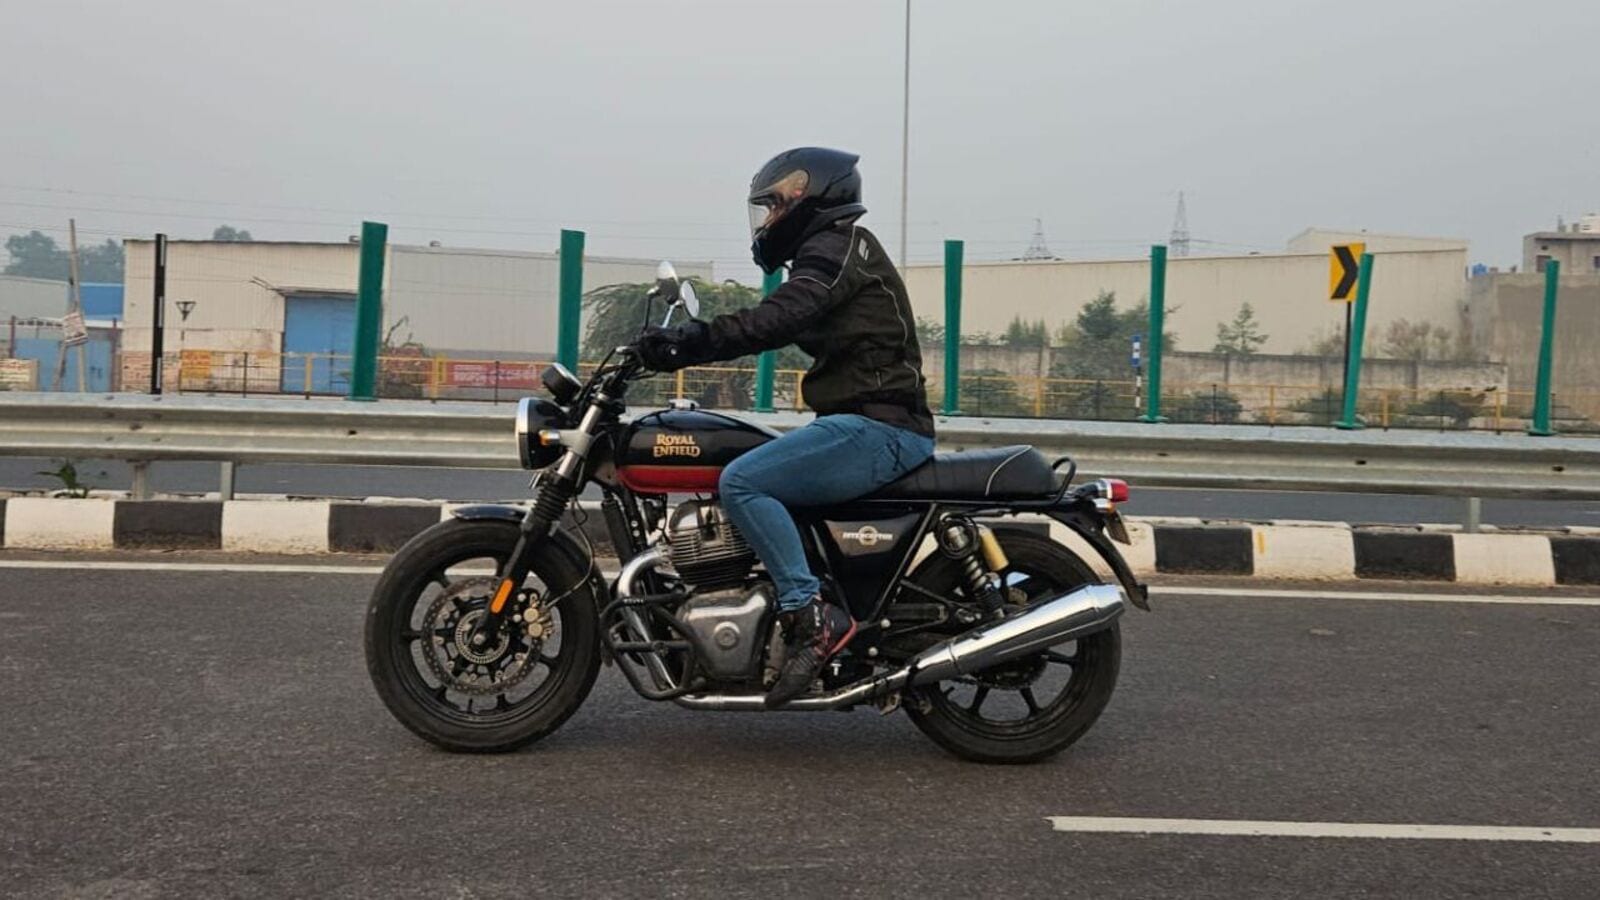 2022 Royal Enfield Classic 350 First Ride Review | Cycle World